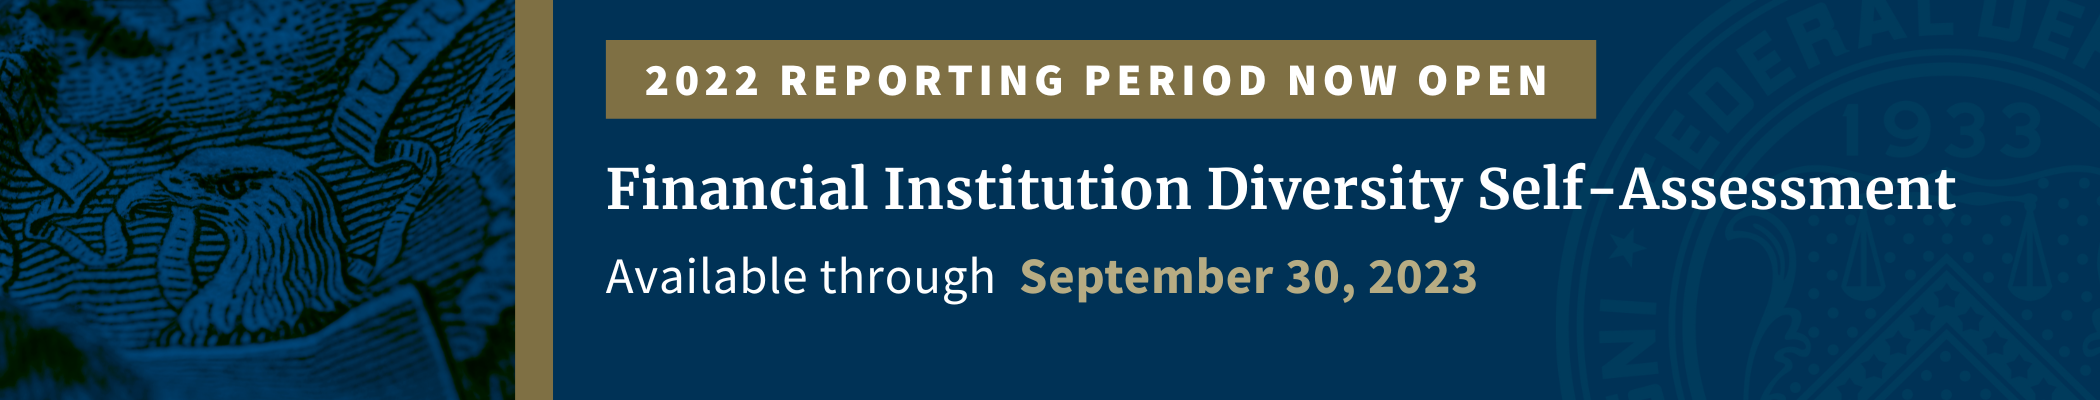 2022 Reporting period now open, Financial Institution Diversity Self-Assessnment, Available through September 30, 2023